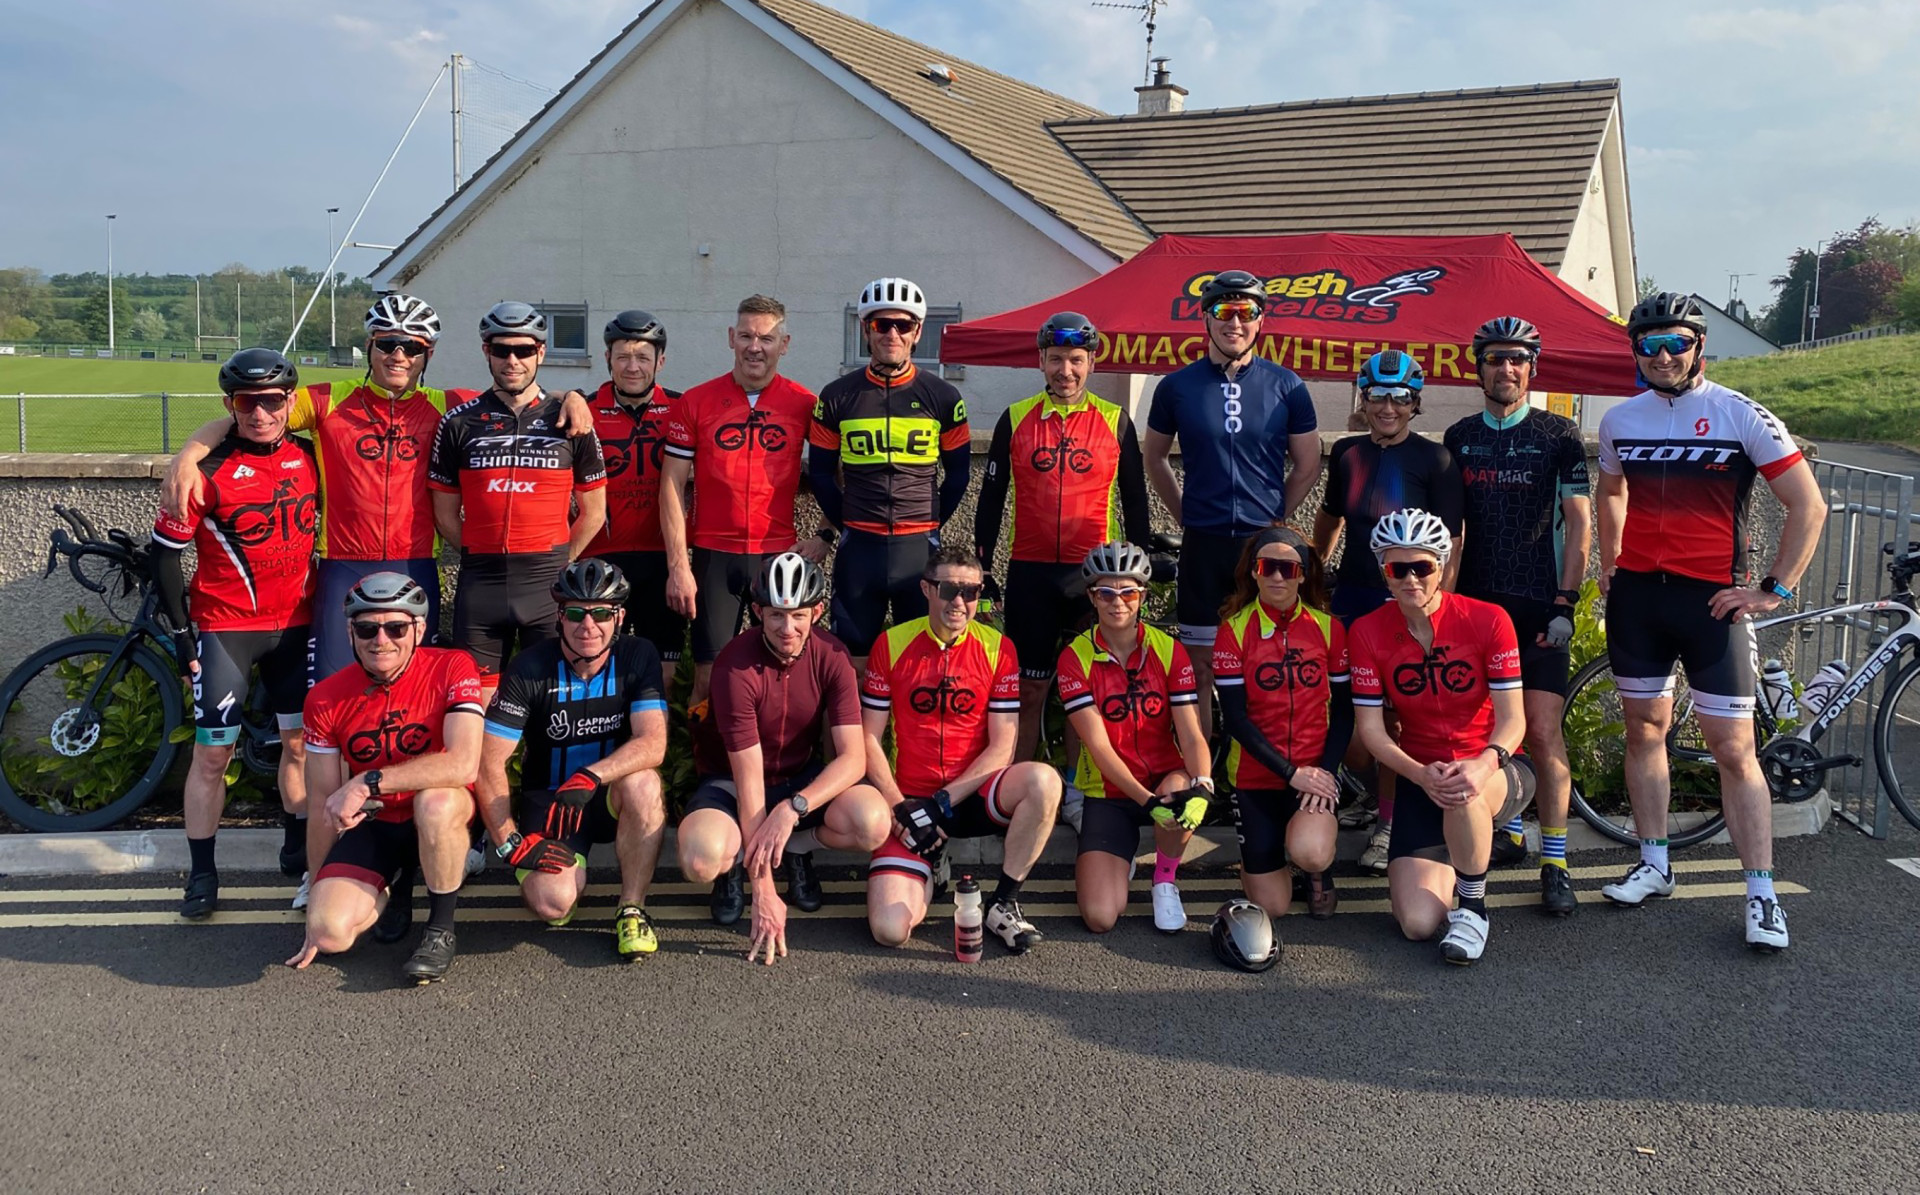 Omagh Wheelers take to hills above Drumquin in memory of Aran